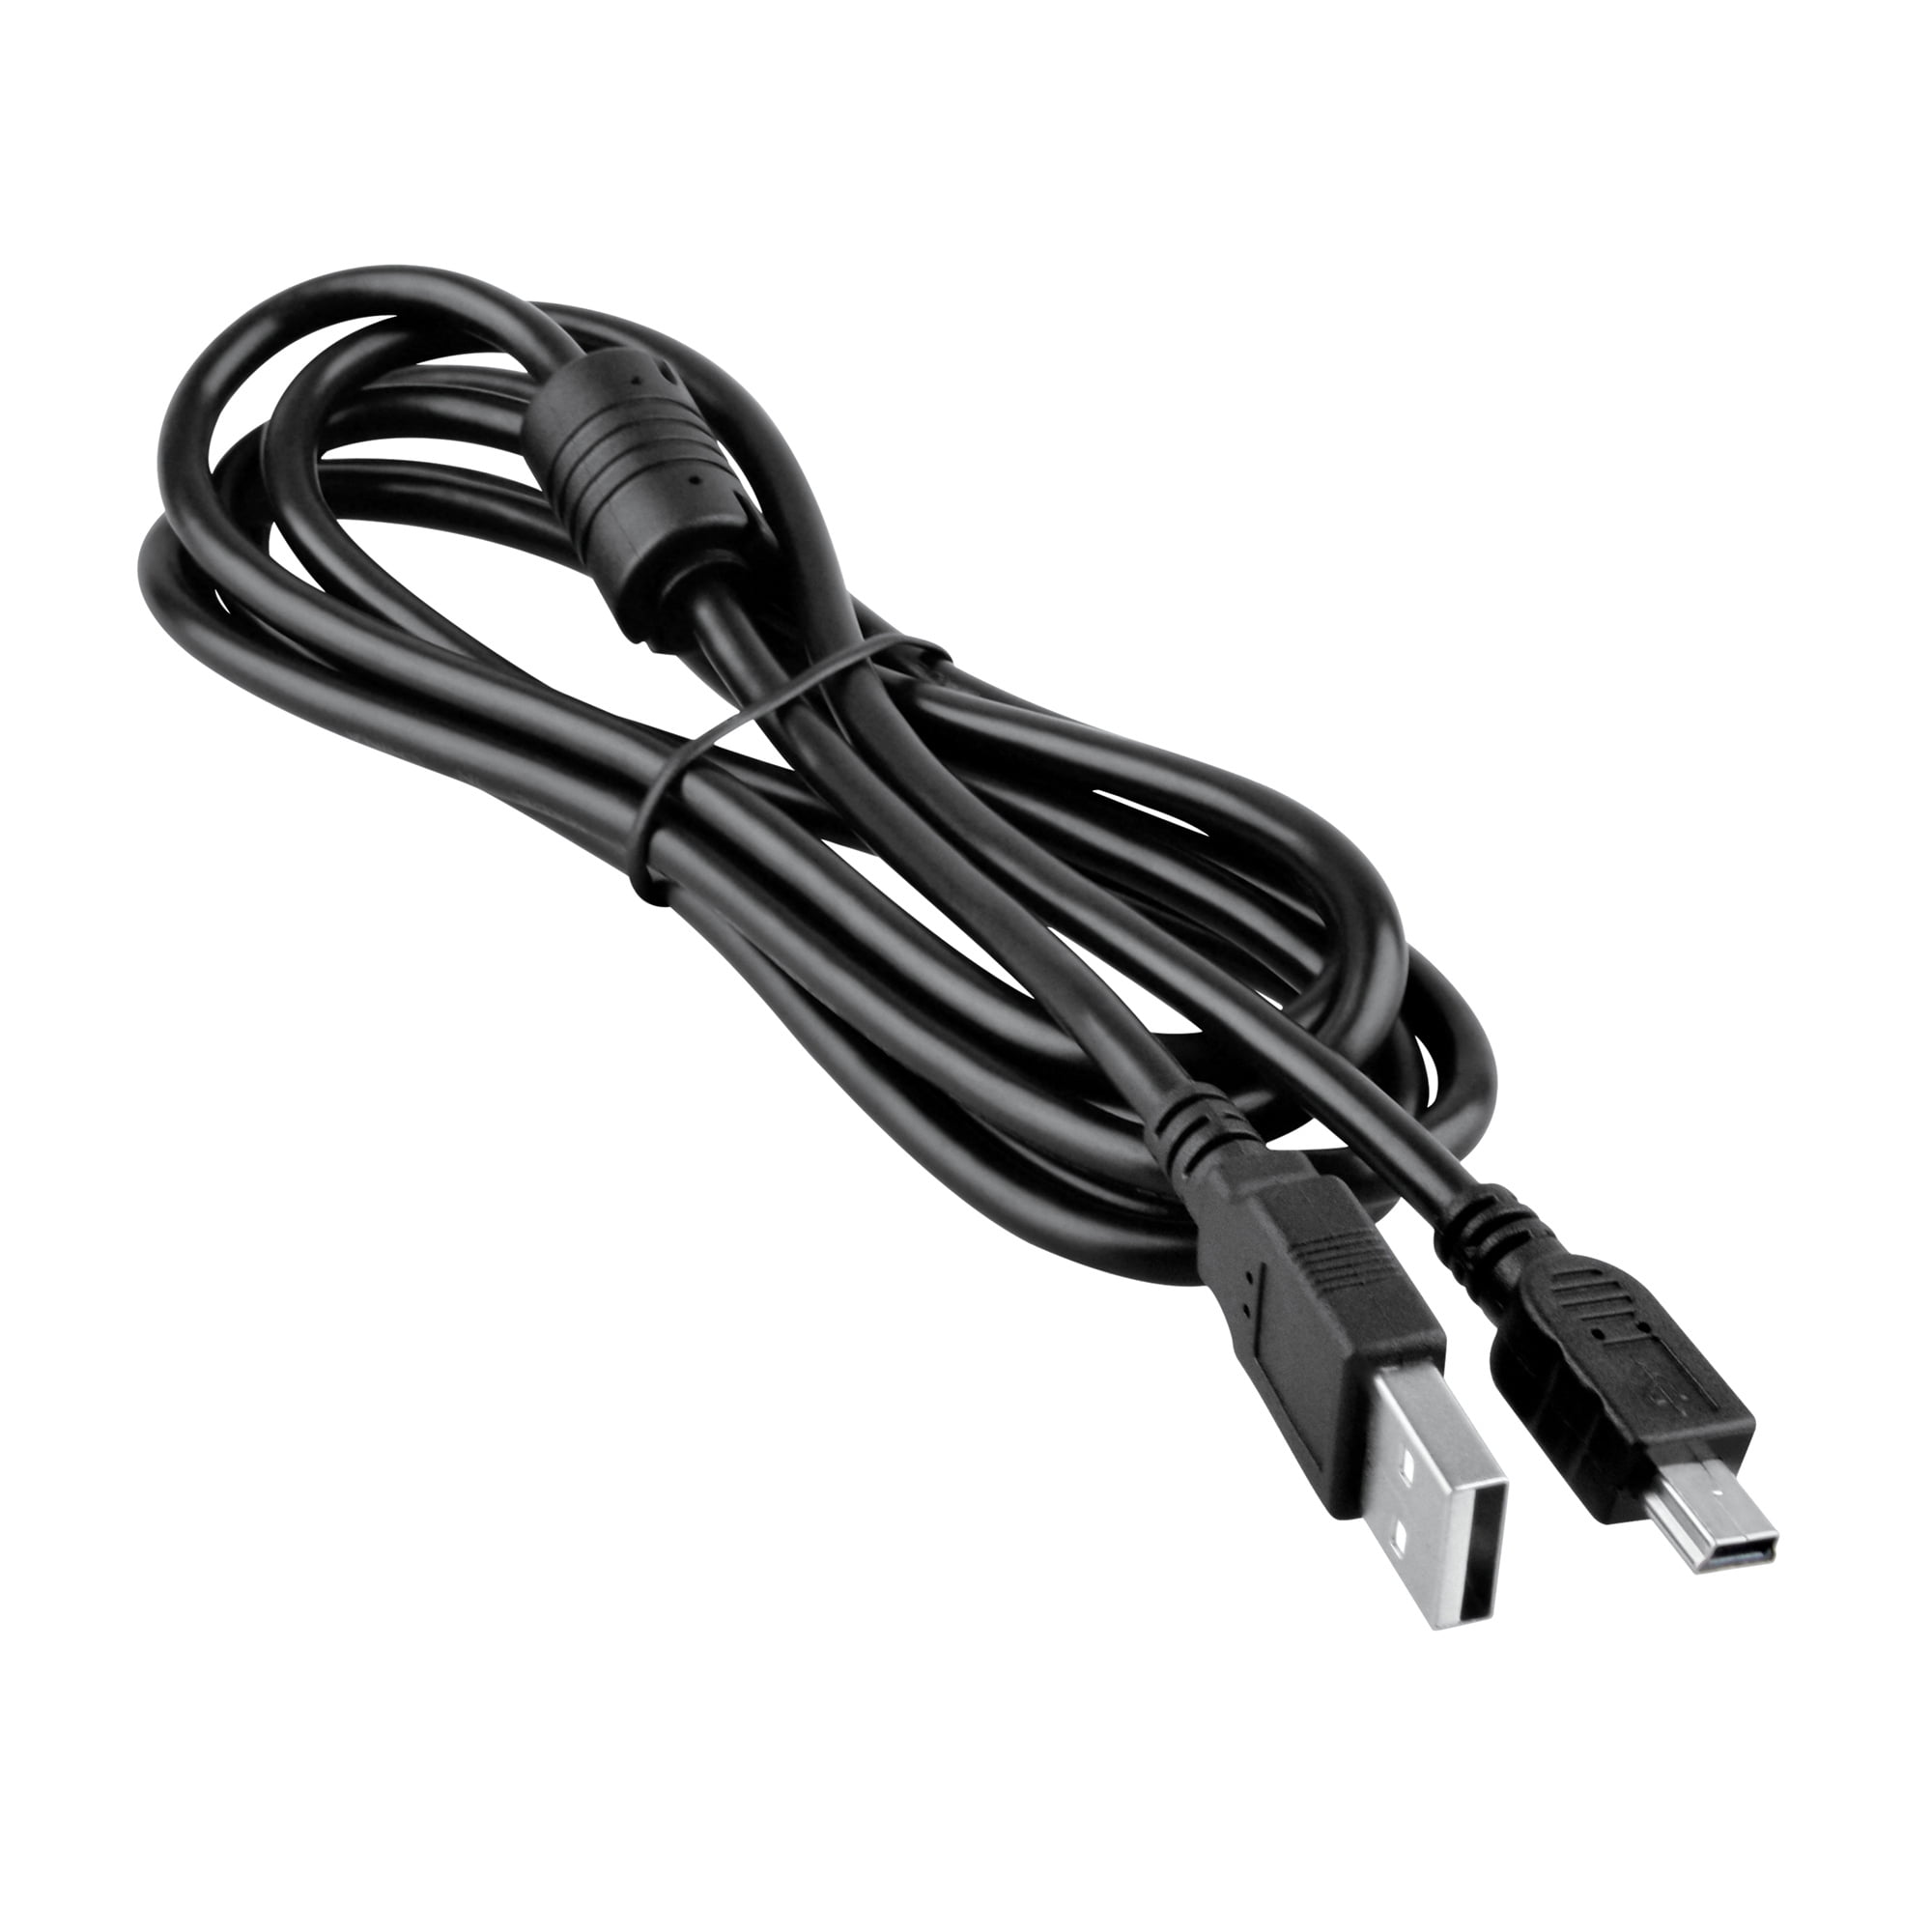 PKPOWER USB Data Cable for Logitech Harmony Pro Pro 895 900 1000 1100 ONE - Walmart.com